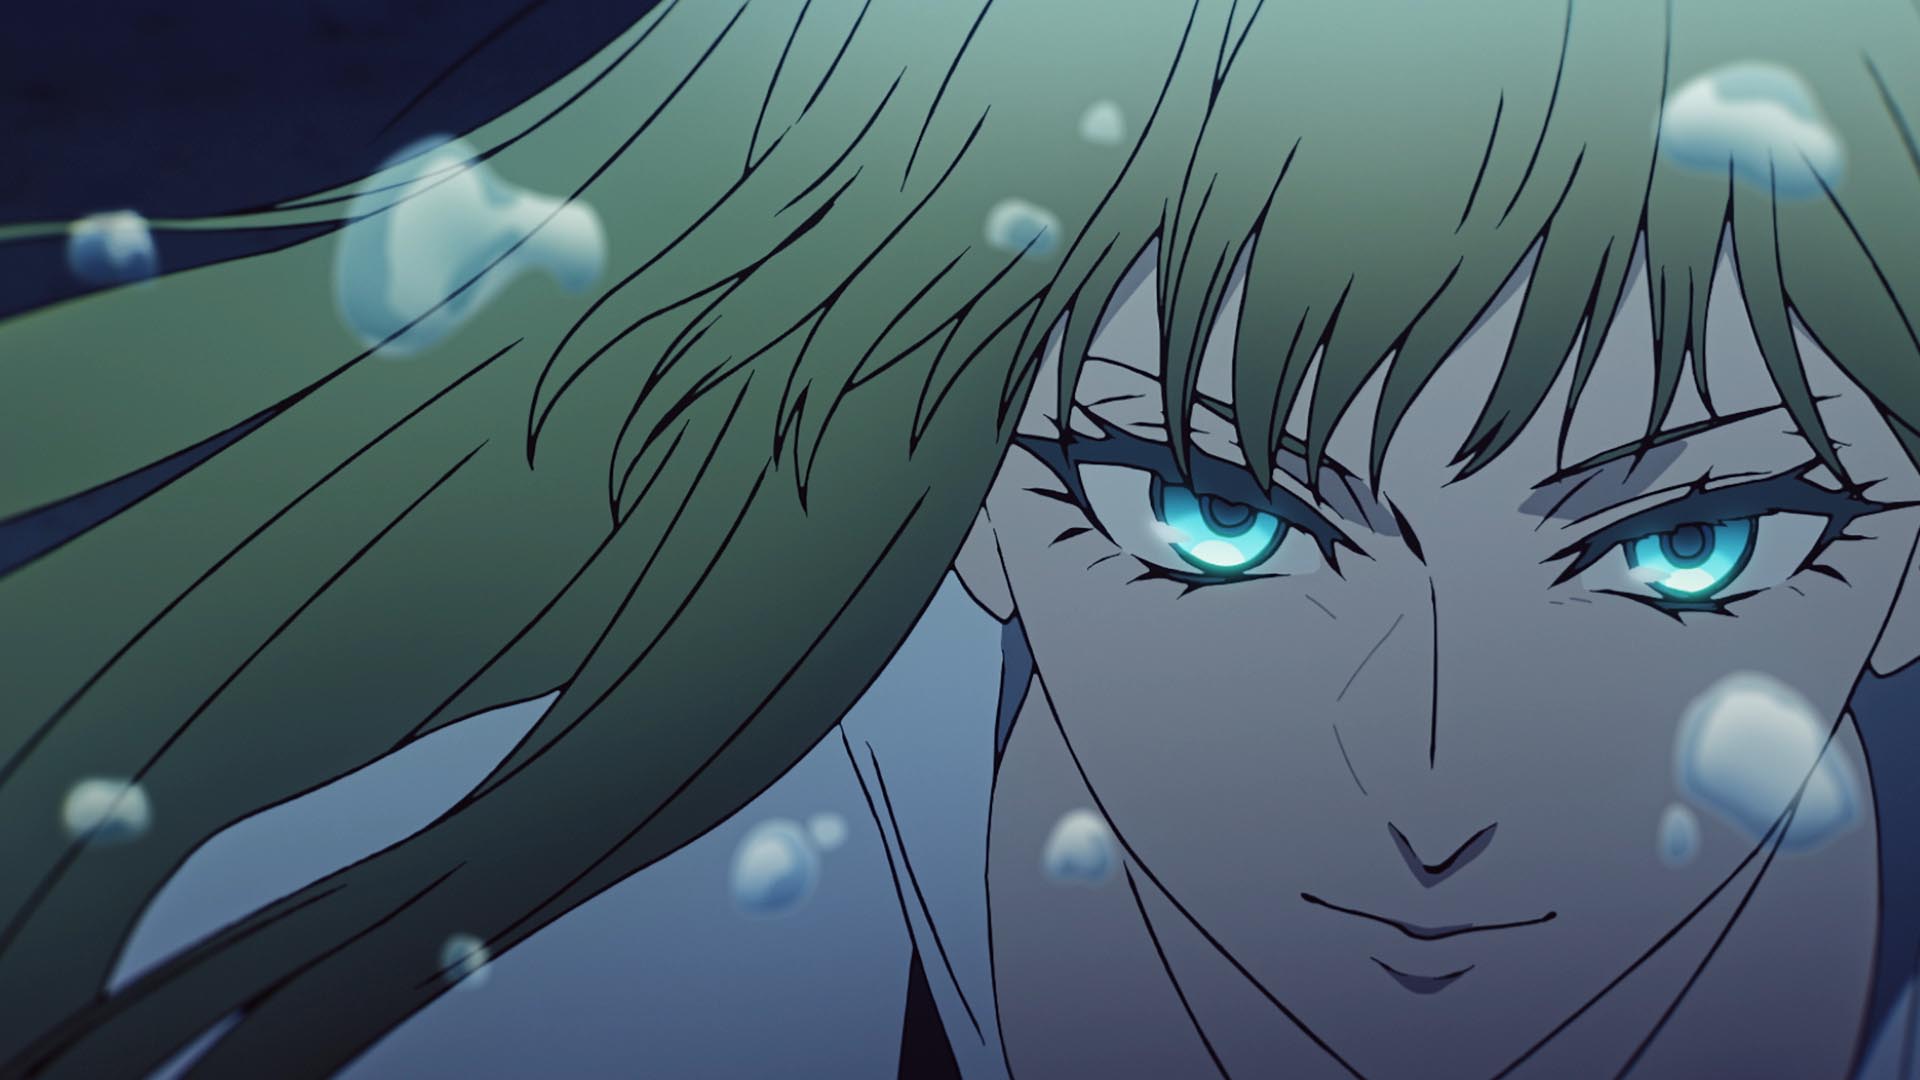 HD desktop wallpaper featuring a close-up of a Fate/strange fake anime character with striking blue eyes and flowing hair, set against a dark, mysterious background.